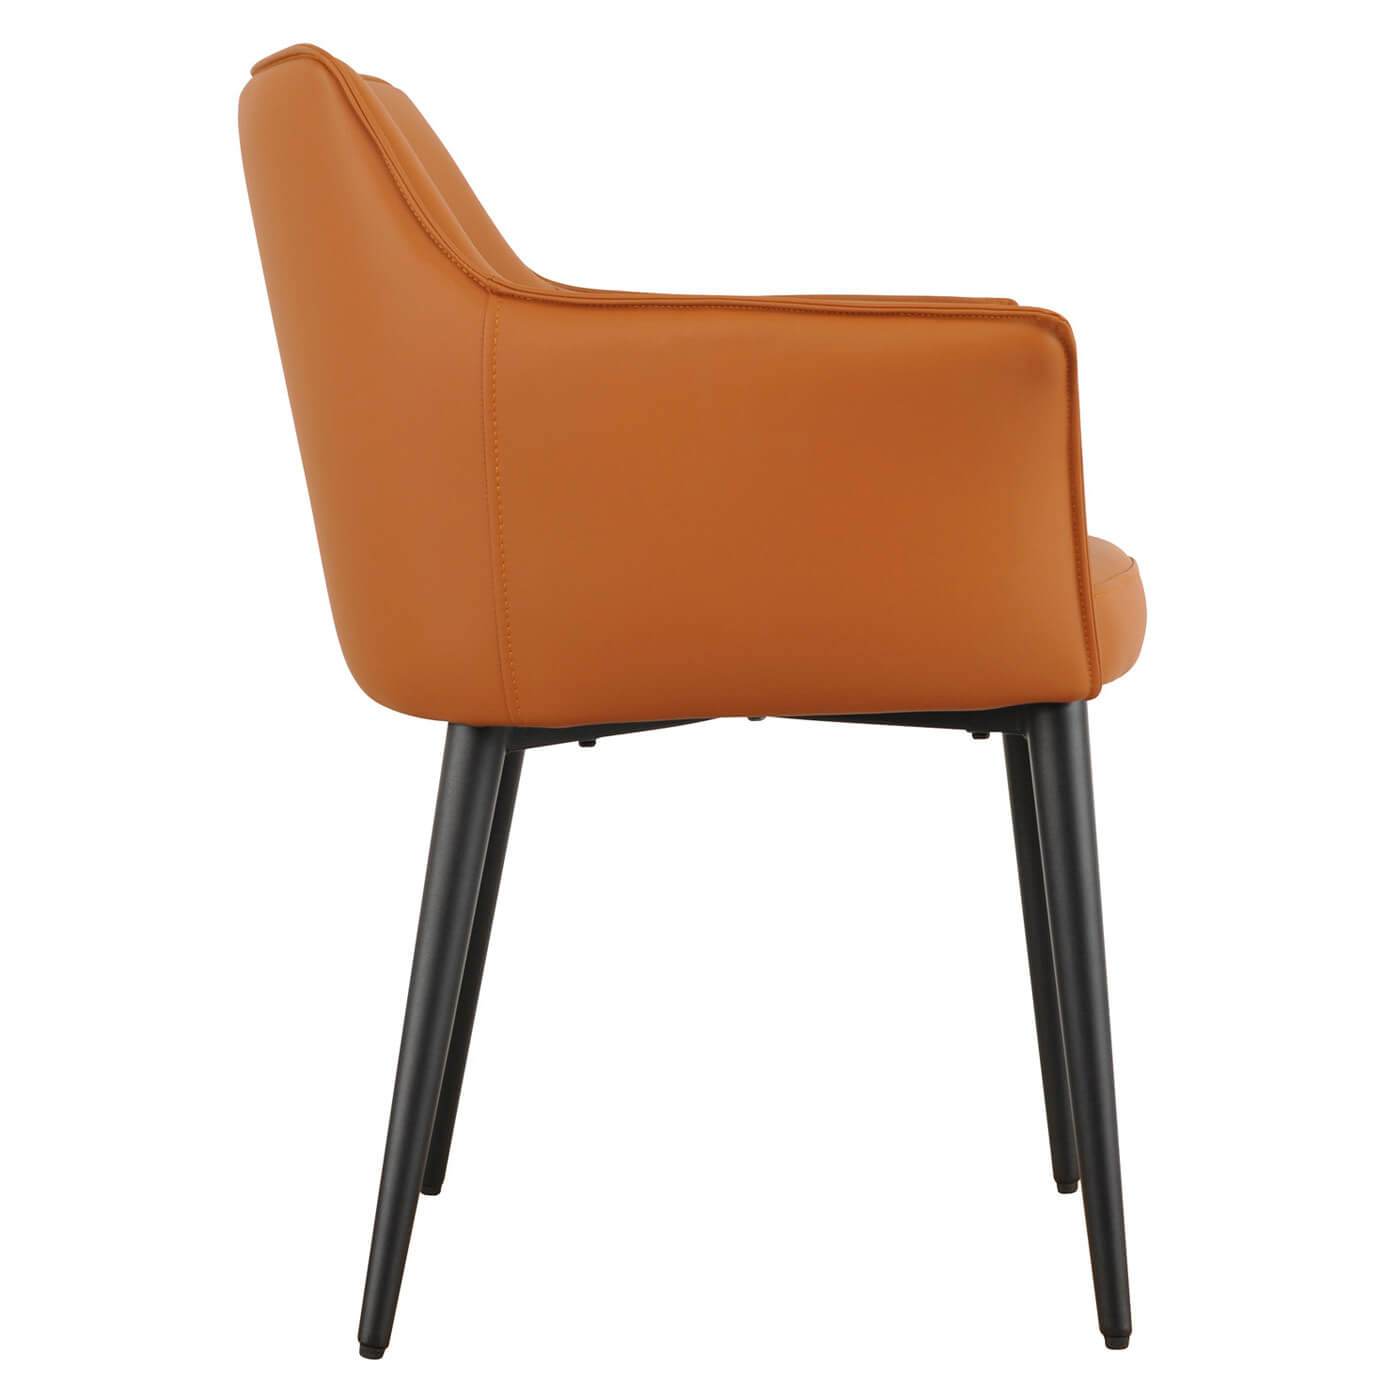 Emporio | Modern Metal PU Leather Dining Chairs With Arms | Set Of 2 | Terracotta